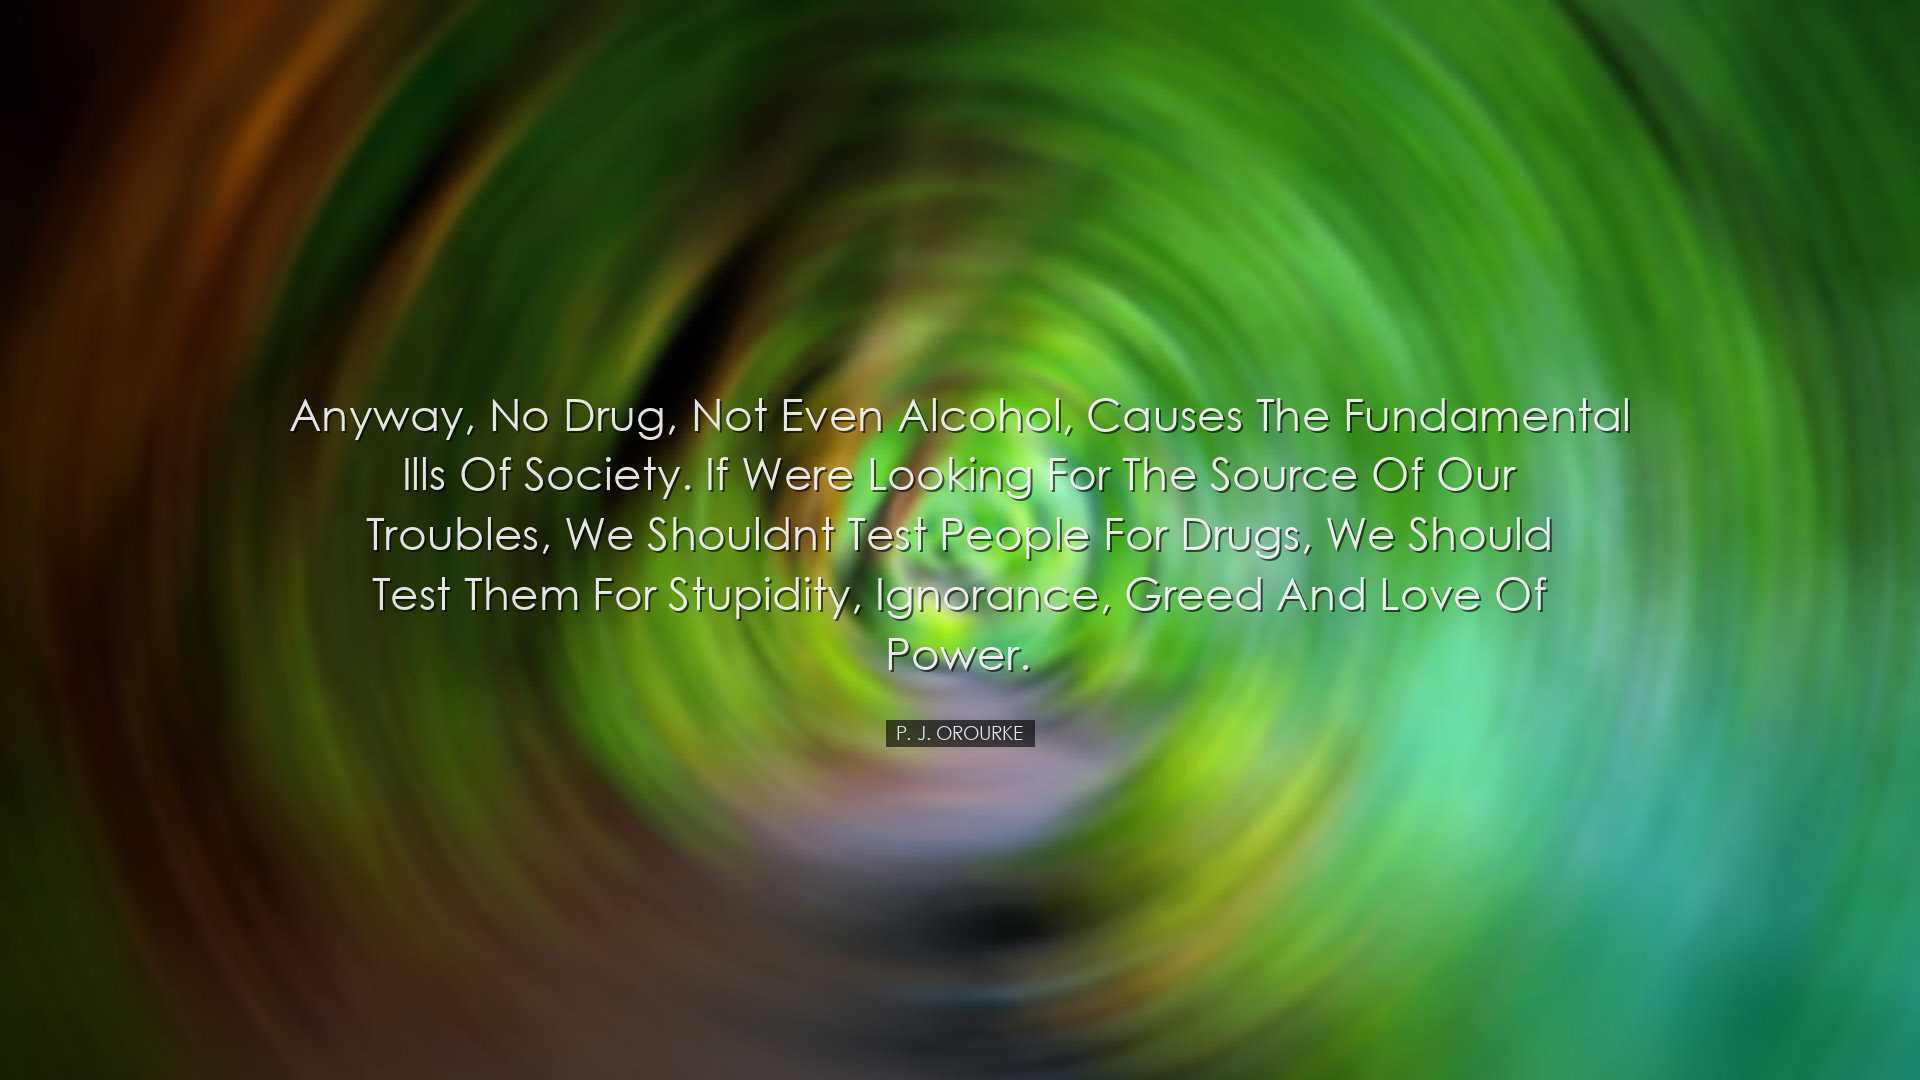 Anyway, no drug, not even alcohol, causes the fundamental ills of